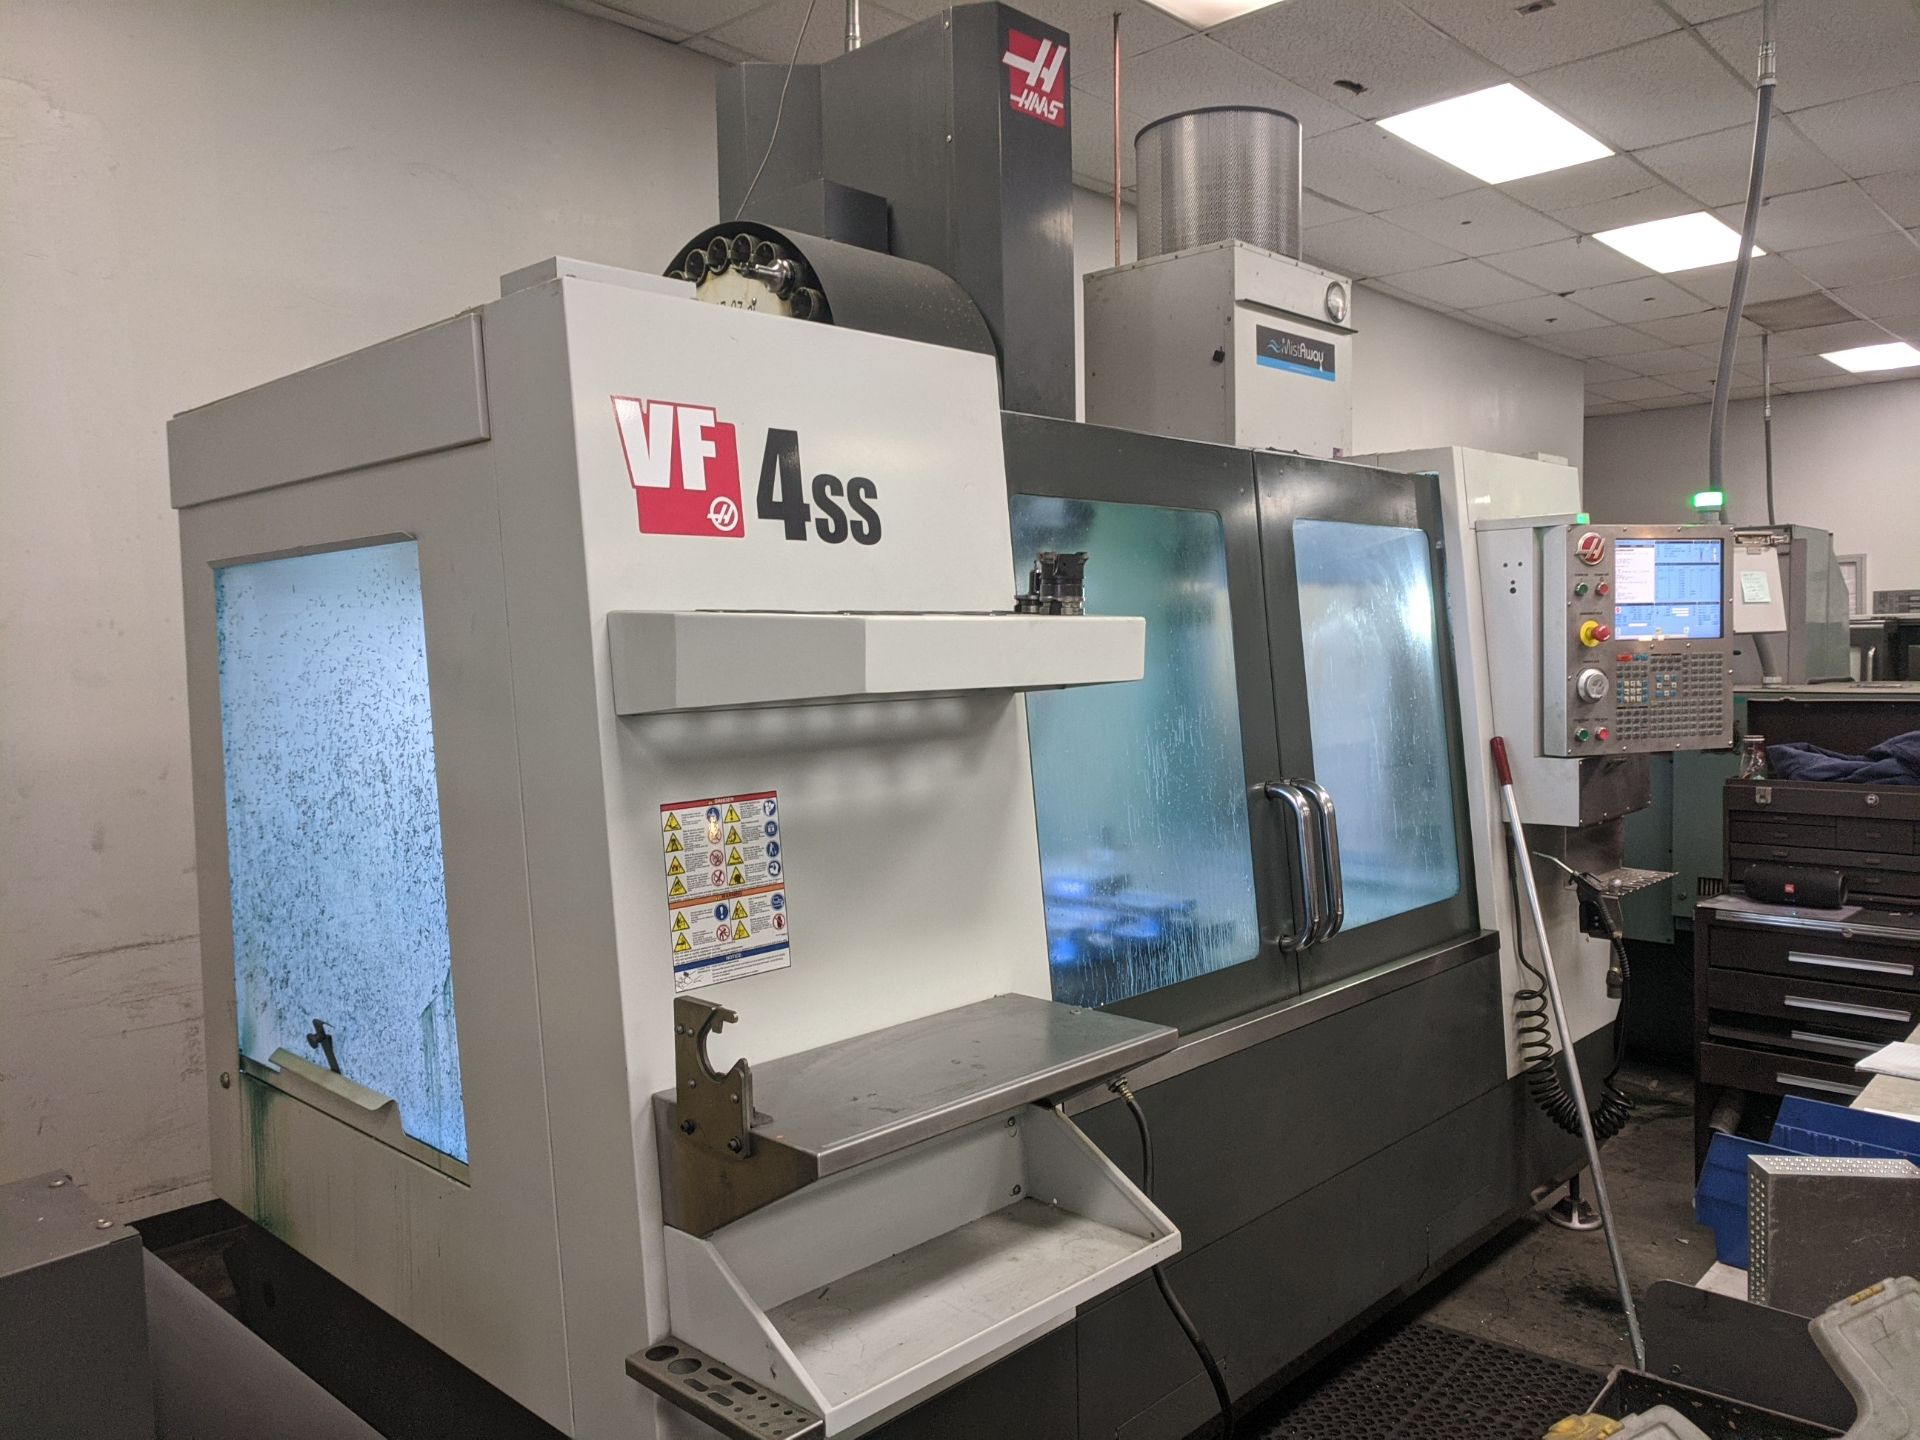 2014 HAAS VF-4SS, 30” X 16” X 20” TRAVELS, 12,000 RPM, USB PORT, BT-40 24 SIDE MOUNT TOOL CHANGER - Image 9 of 14